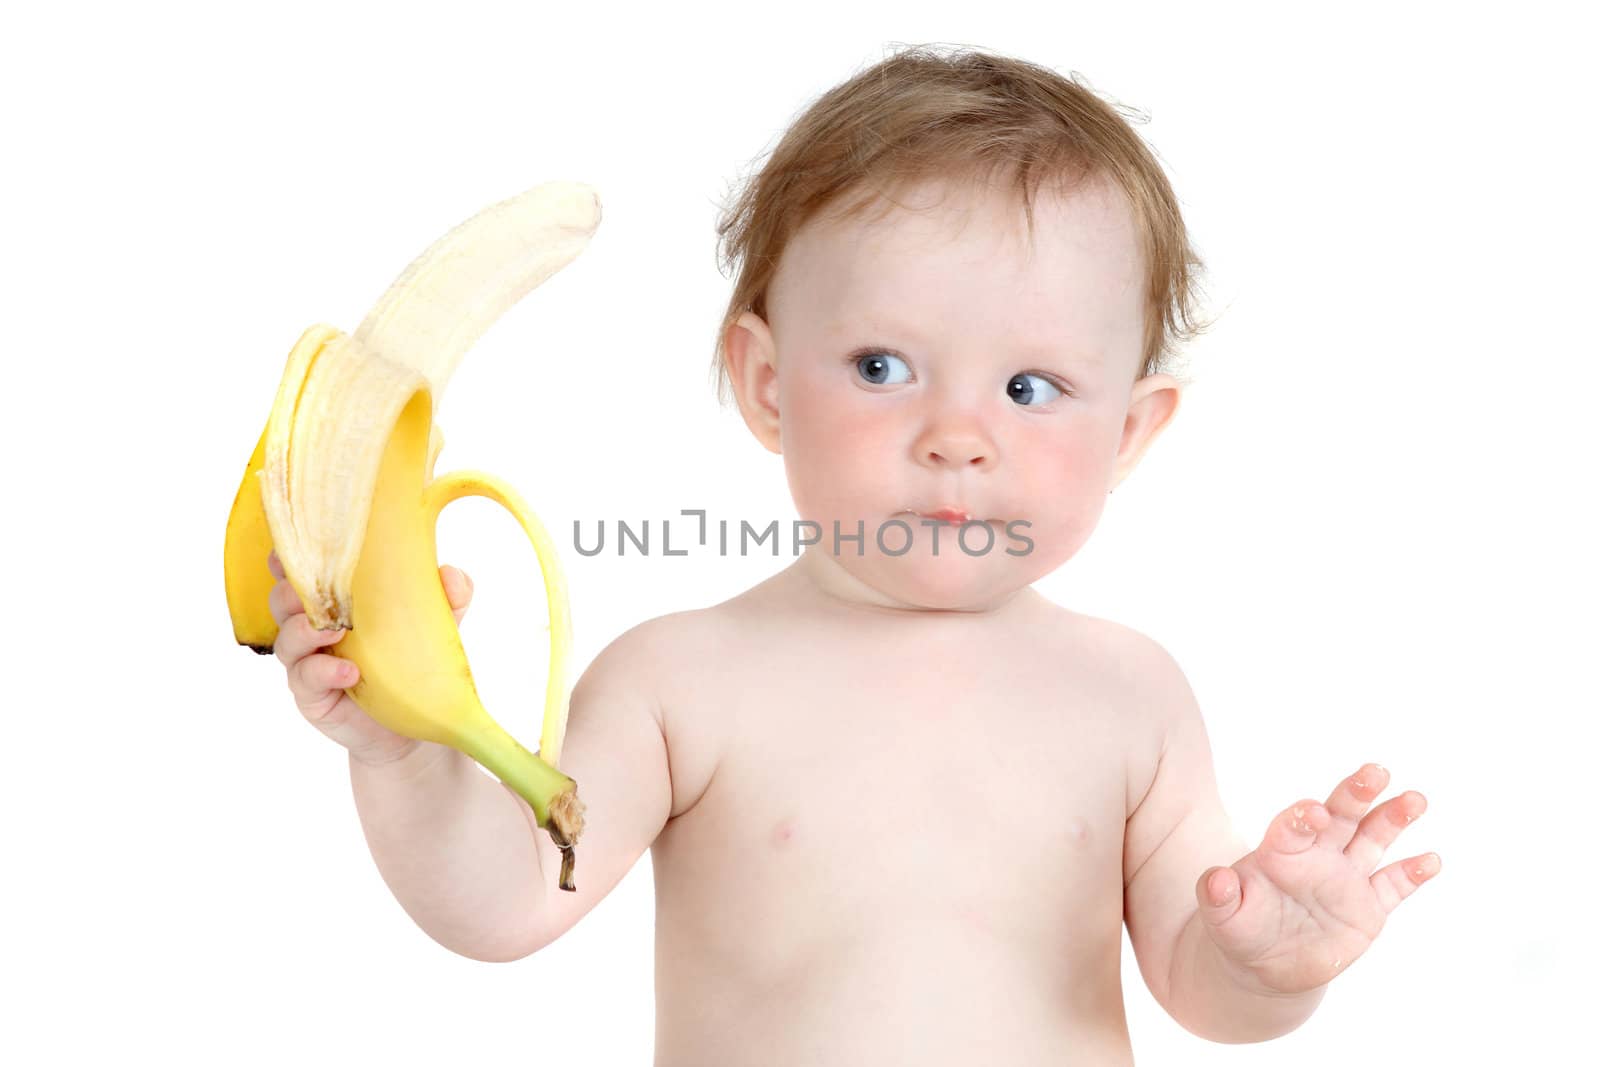 the little blue-eyed girl eats banana. a portrait on a white background. option 2